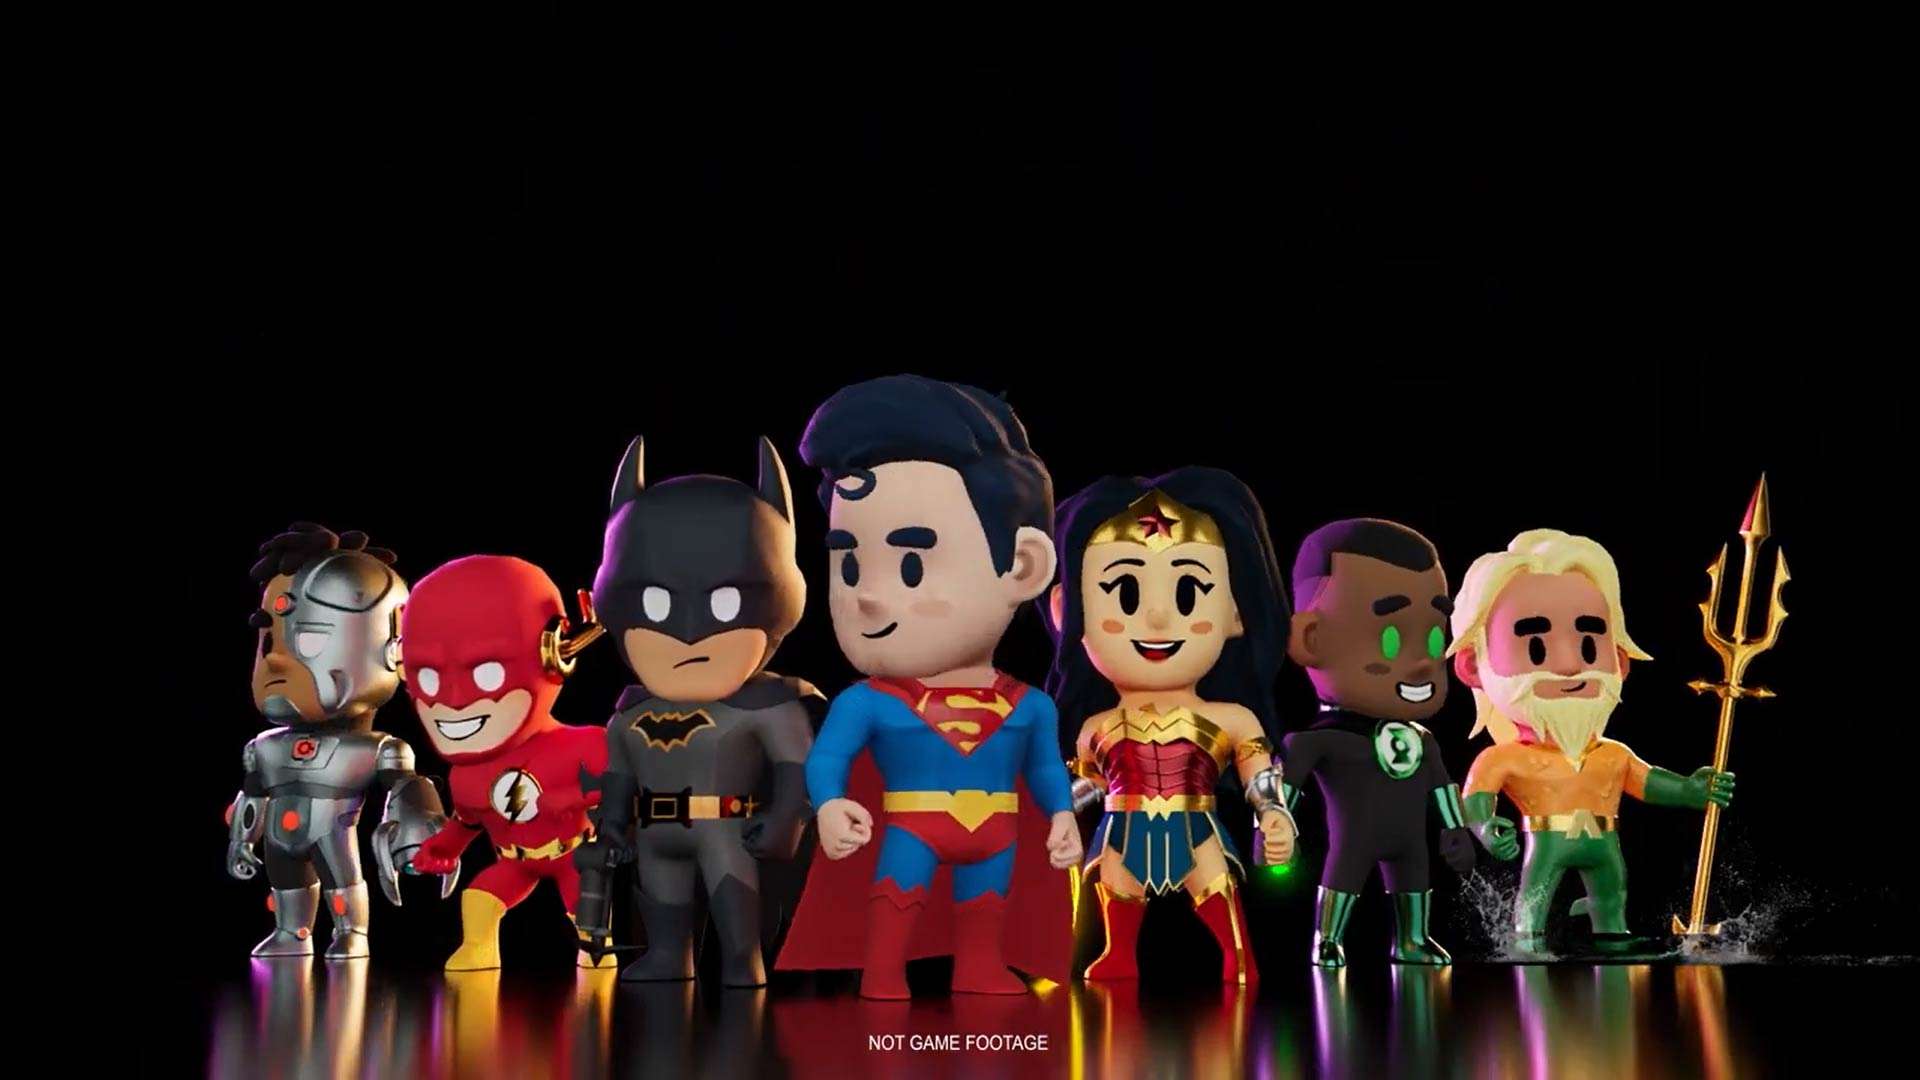 DC Justice League video game announced